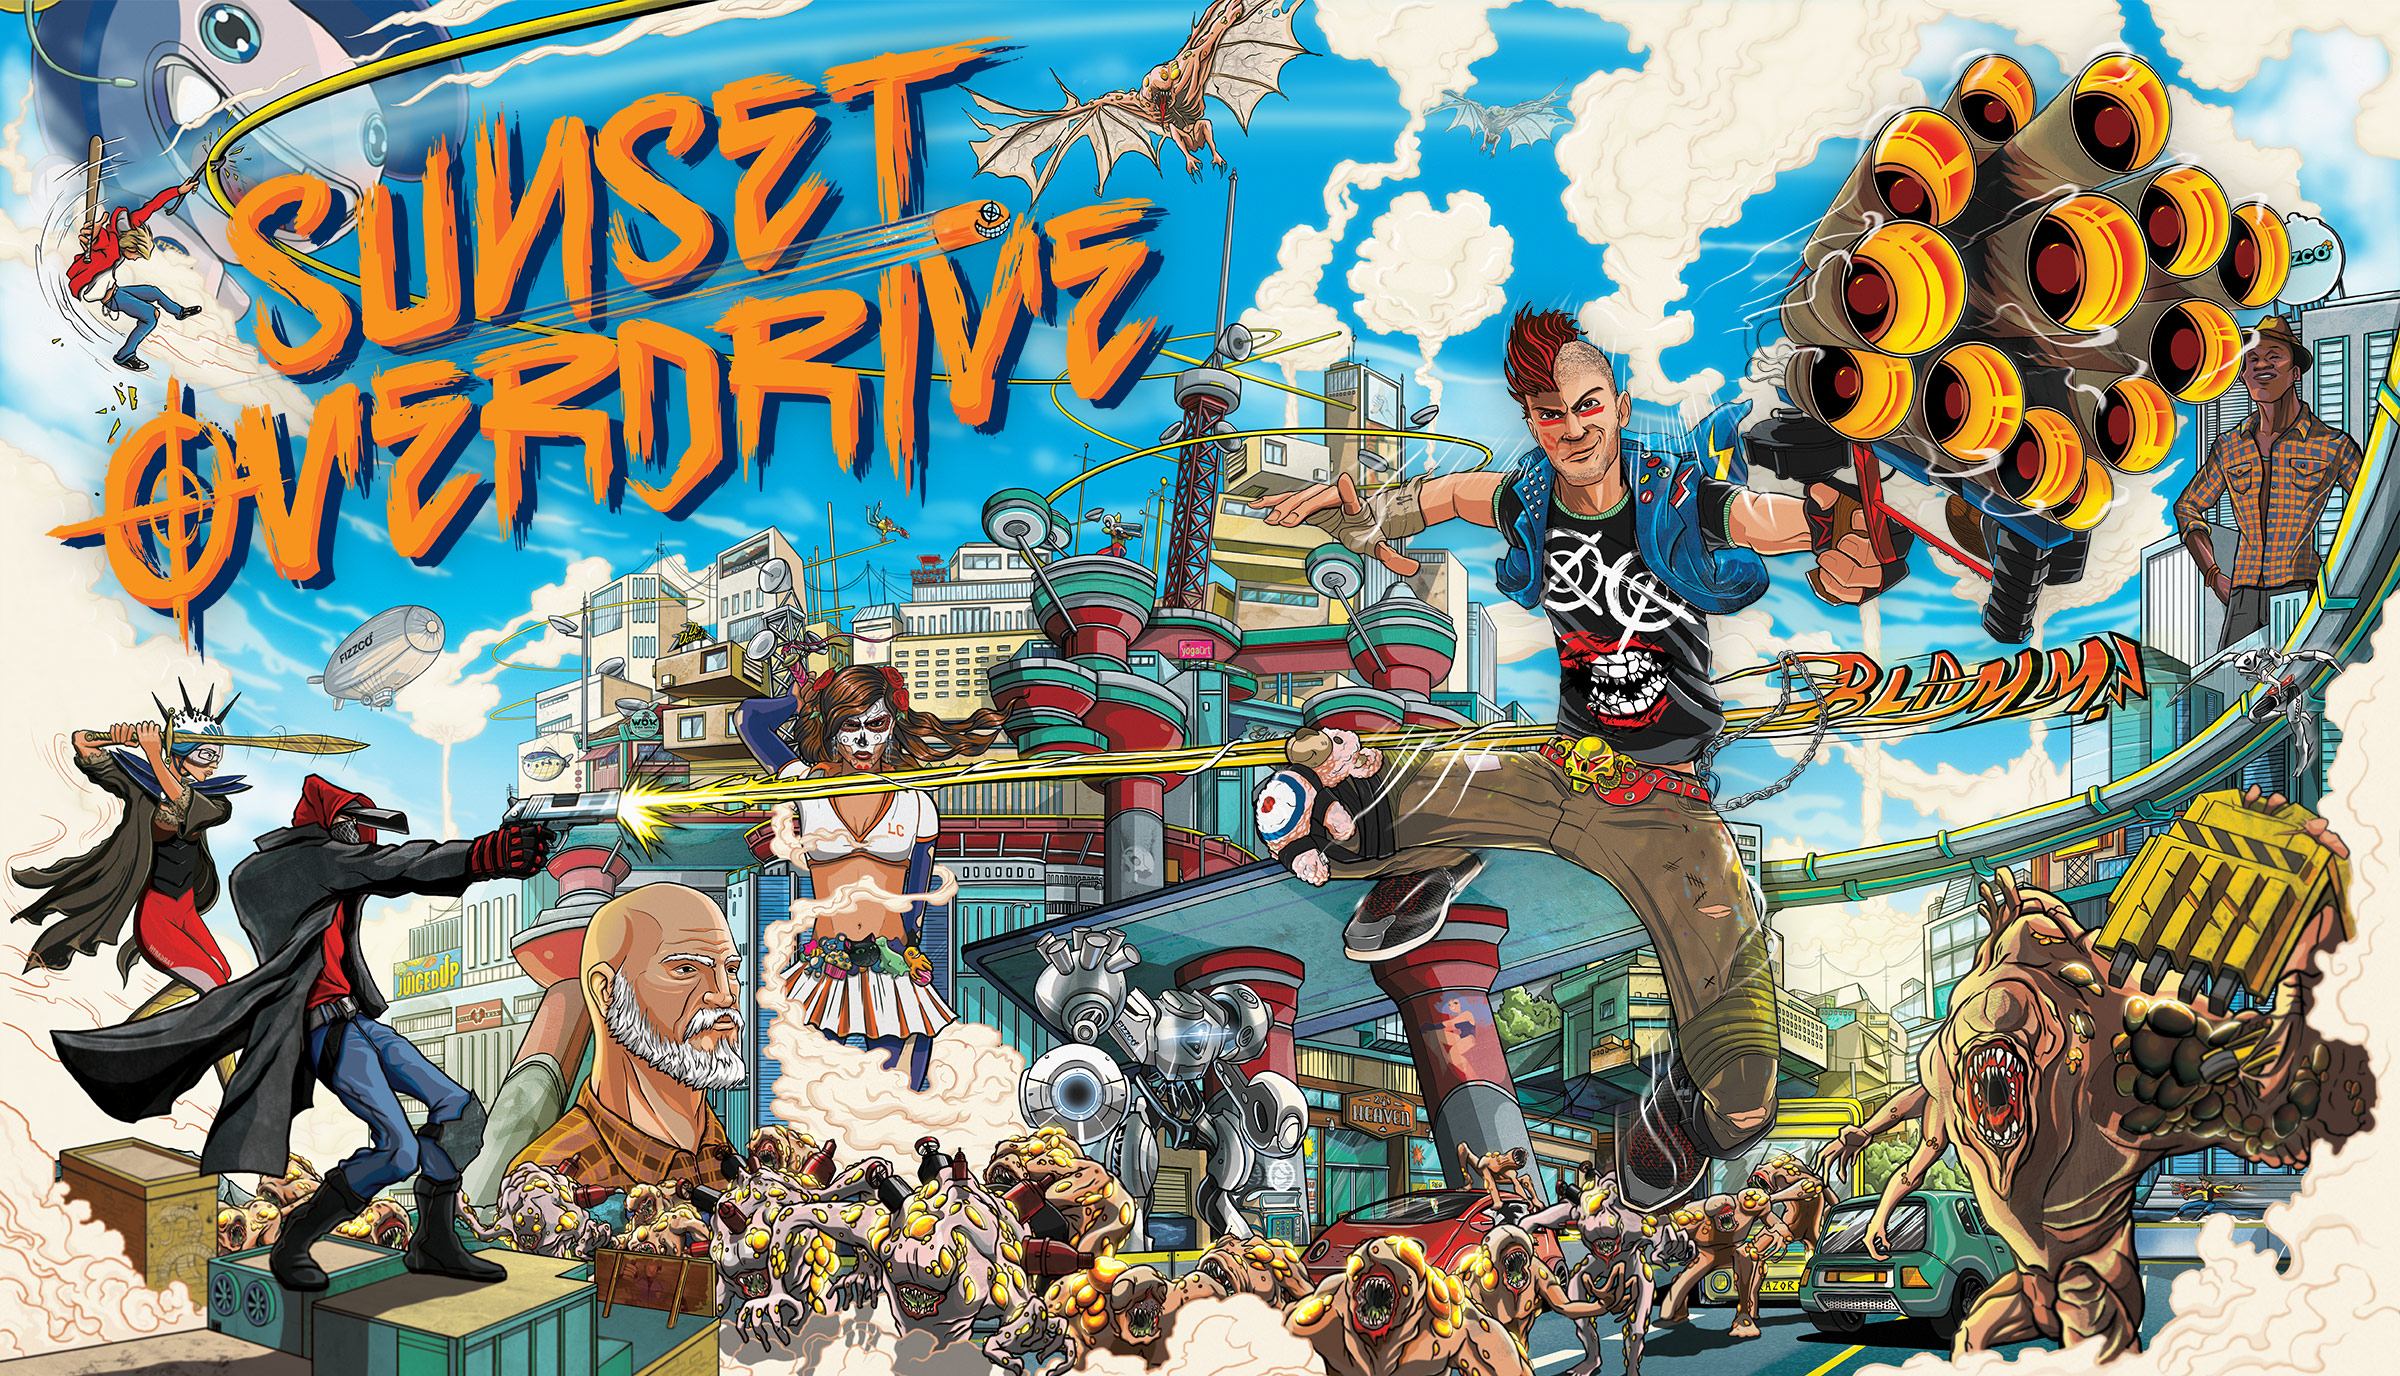 Video Game Sunset Overdrive 2400x1376